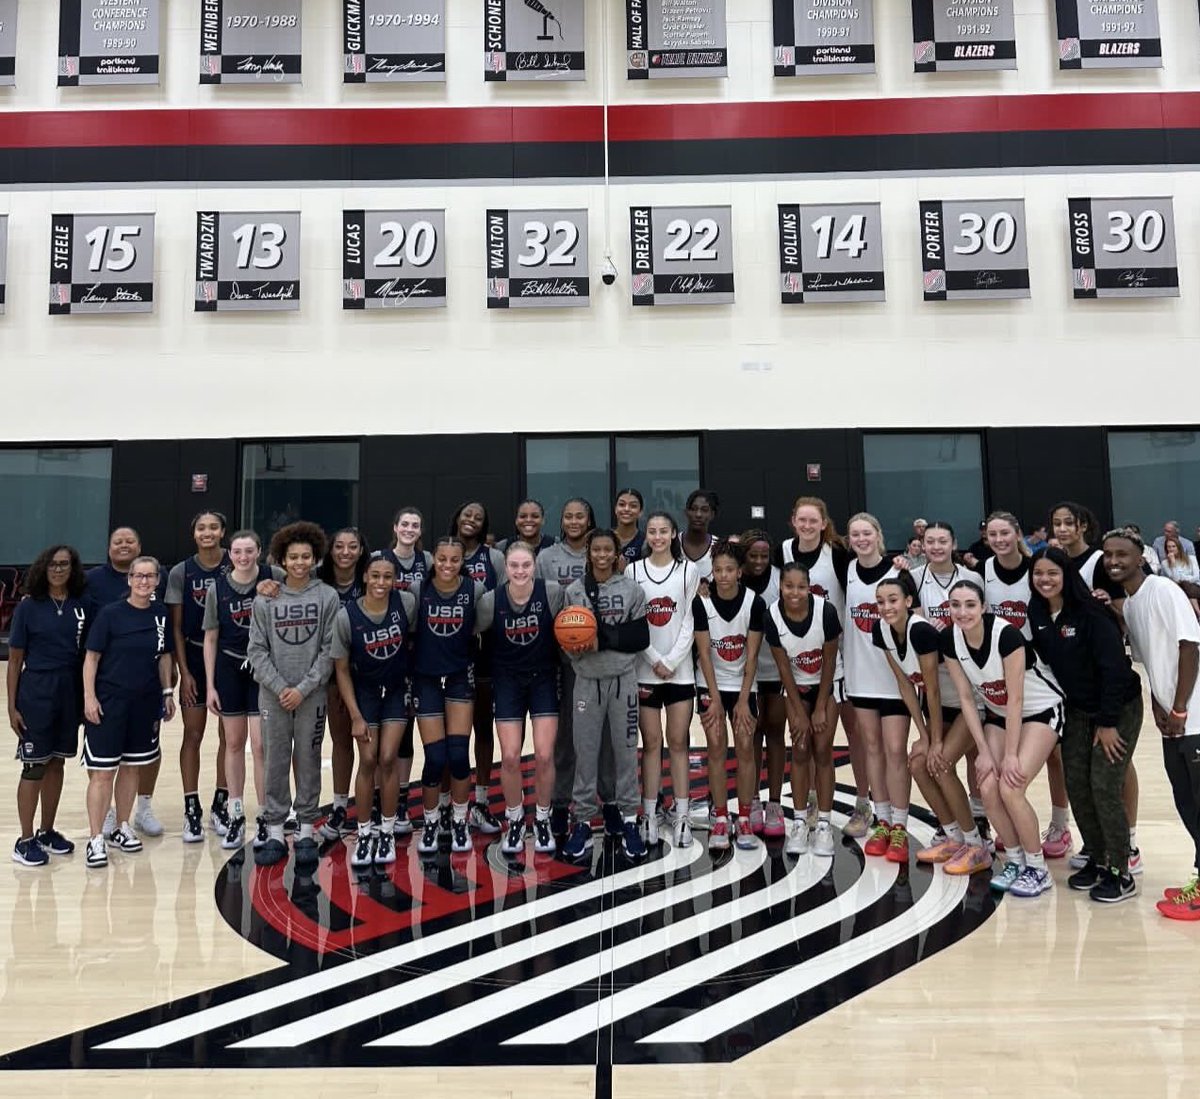 Had an amazing opportunity to compete against the world team and team USA at the Nike Hoop Summit this week. Thank you to everyone who allowed me to be apart of this amazing event. @nikehoopsummit @usabasketball @usabjnt #basketball #usabasketball #grind